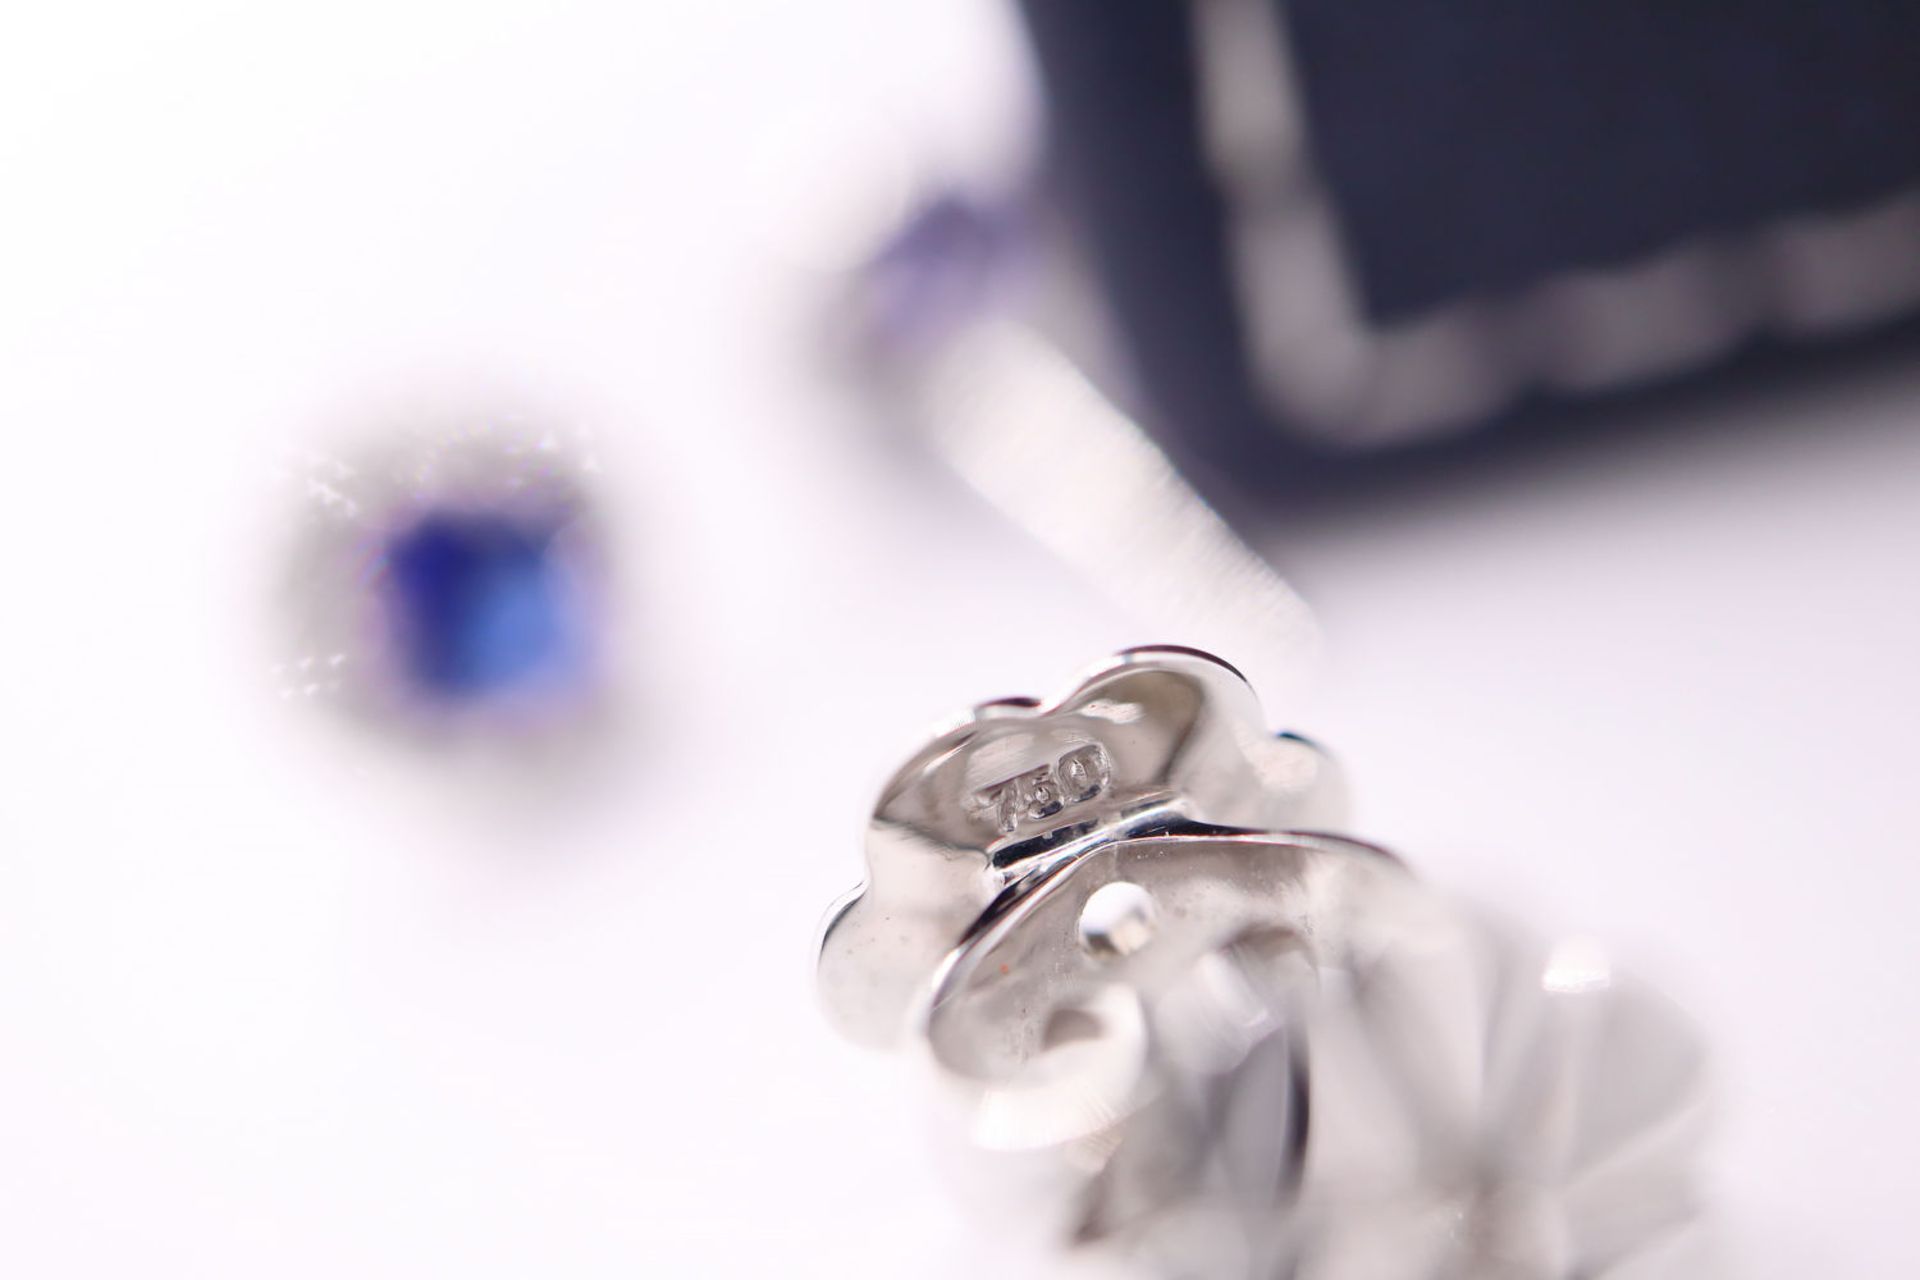 18K WHITE GOLD - 1.01CT SAPPHIRE & DIAMOND STUD EARRINGS; with LAINGS Original Receipt / Certificate - Image 7 of 8